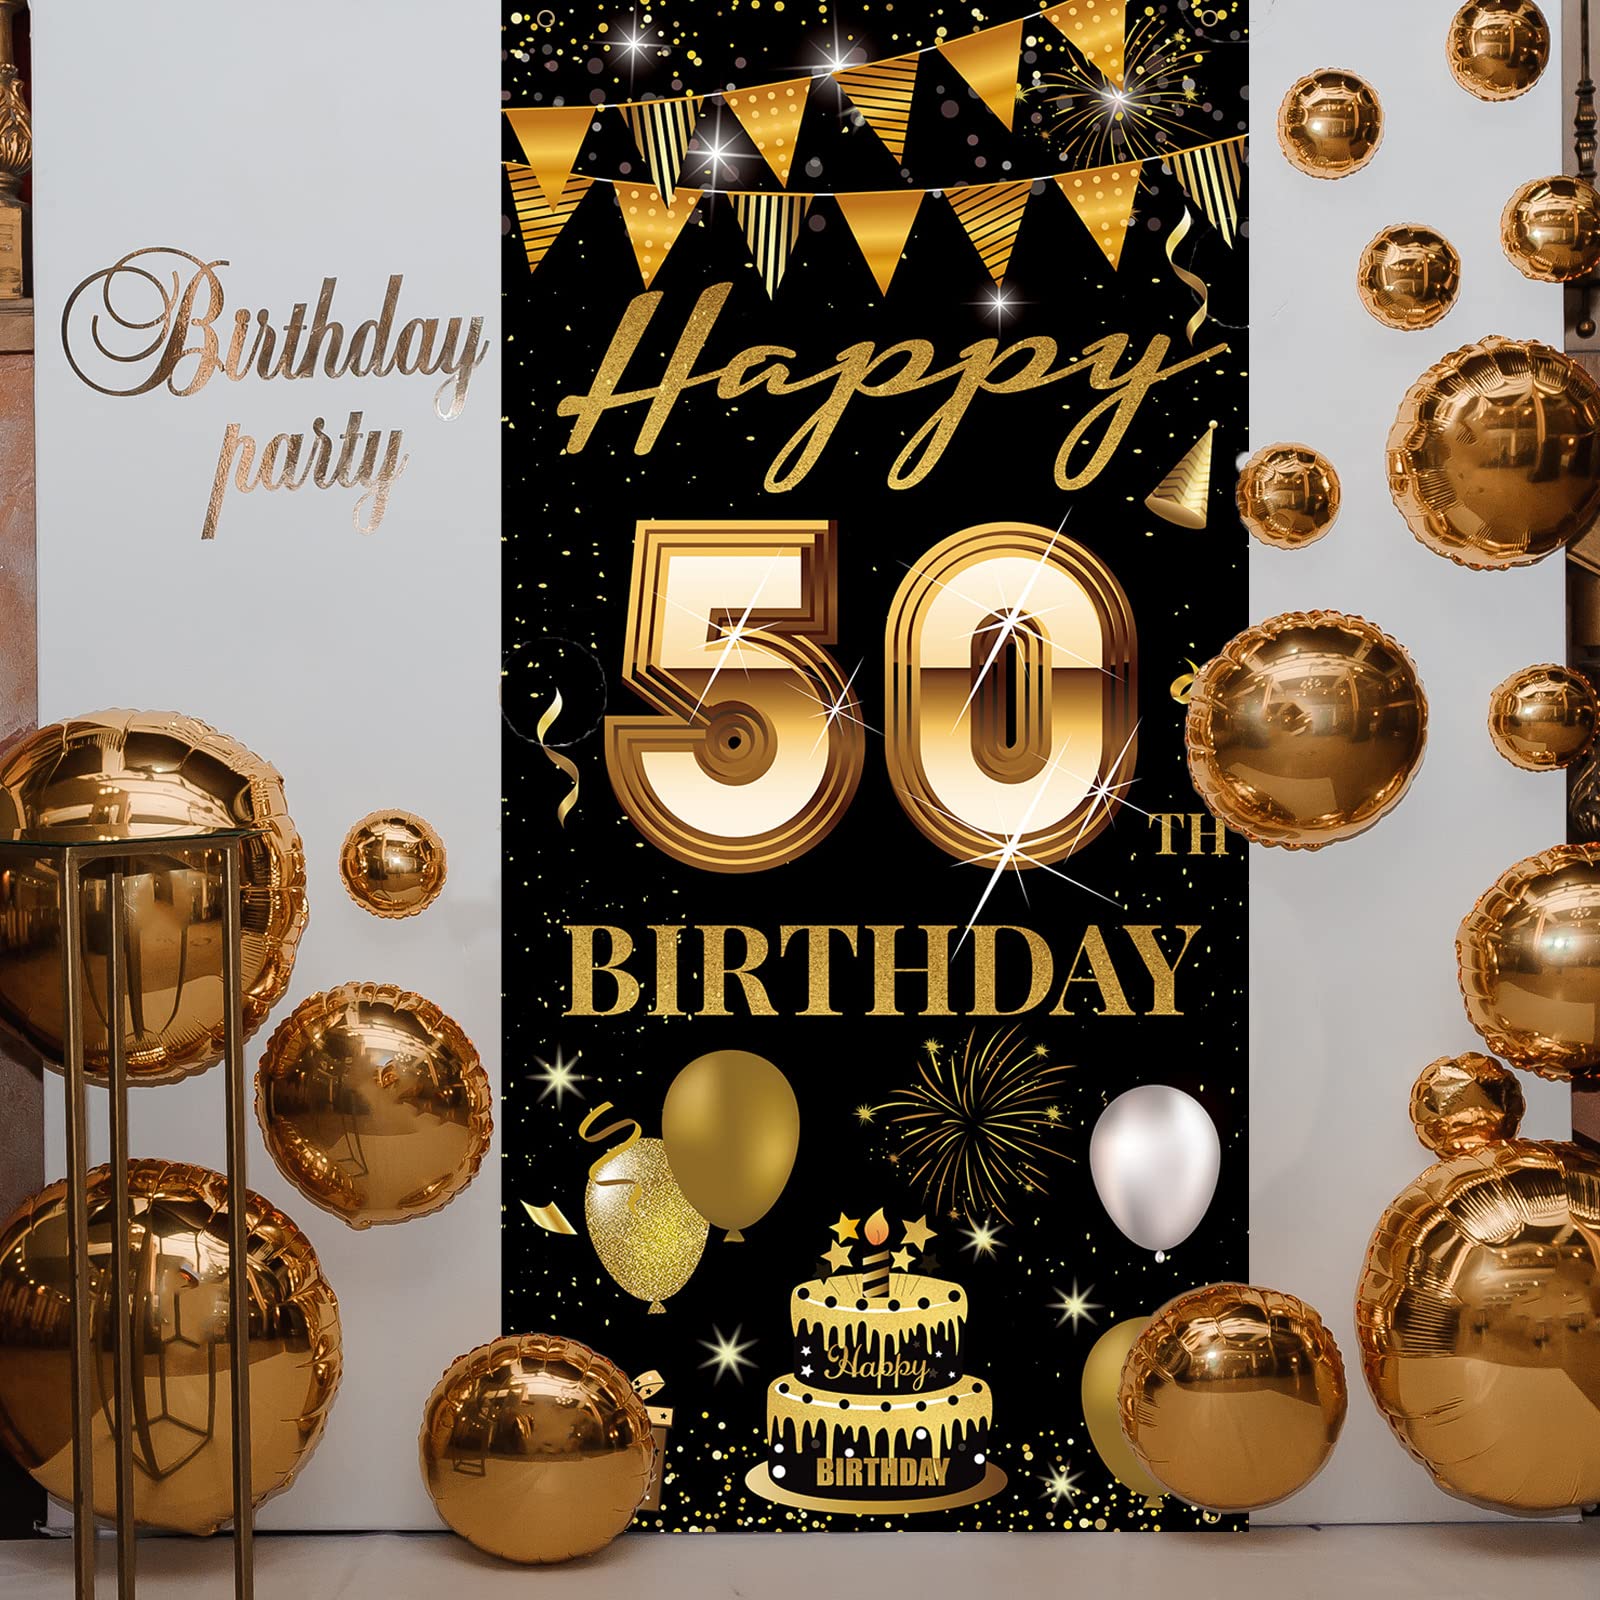 HTDZZI 50th Birthday Door Banner, Happy 50th Birthday Decorations Men Women, 50 Years Old Birthday Backdrop Photo Booth Props, Black Gold 50 Birthday Party Yard Sign Decor for Outdoor Indoor Sturdy